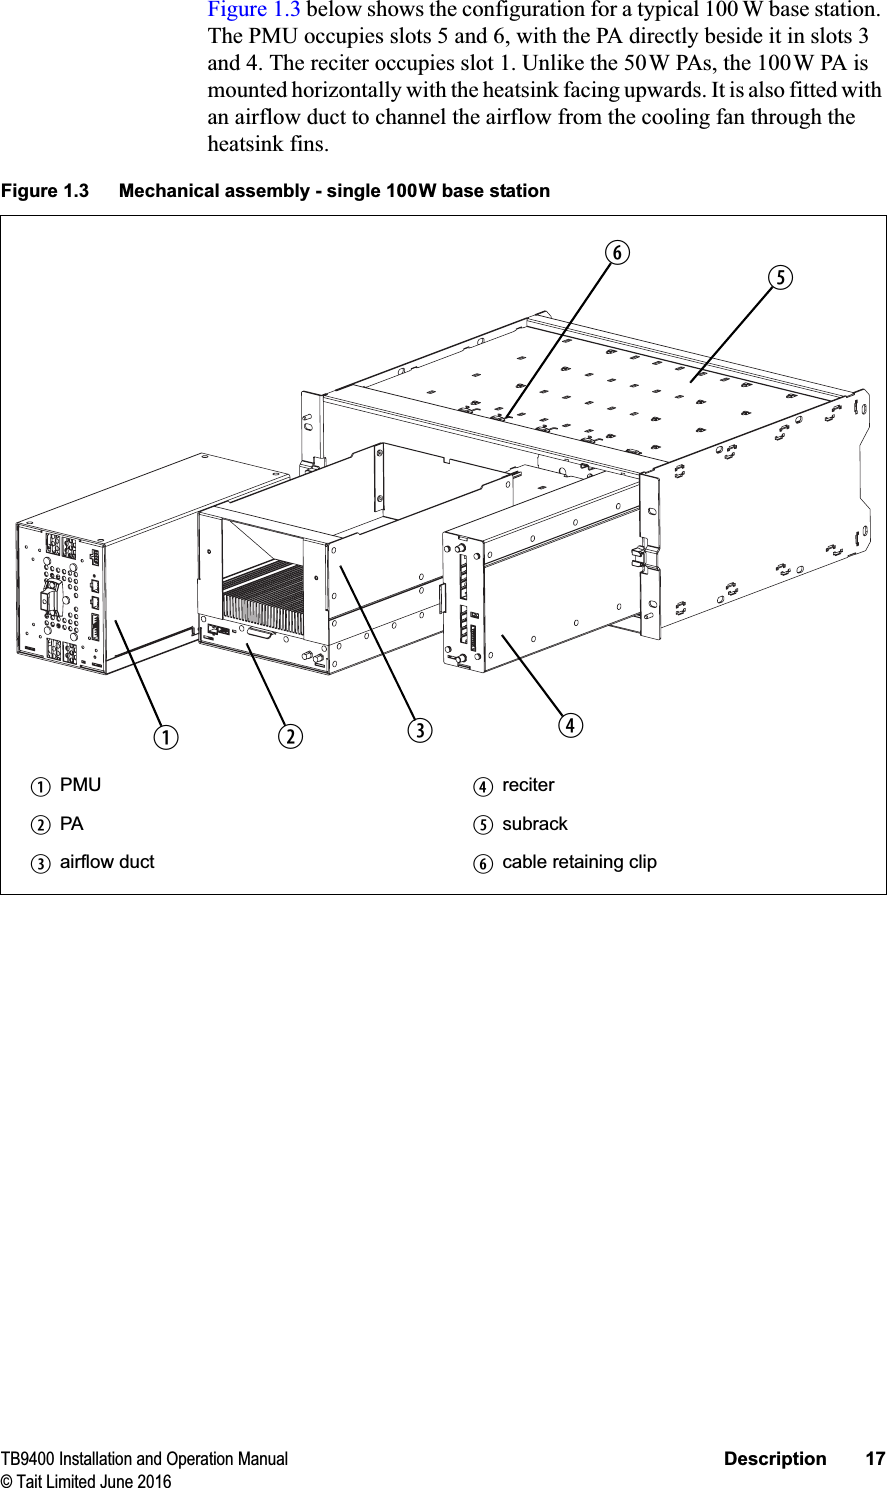 TB9400 Installation and Operation Manual Description 17© Tait Limited June 2016Figure 1.3 below shows the configuration for a typical 100 W base station. The PMU occupies slots 5 and 6, with the PA directly beside it in slots 3 and 4. The reciter occupies slot 1. Unlike the 50W PAs, the 100W PA is mounted horizontally with the heatsink facing upwards. It is also fitted with an airflow duct to channel the airflow from the cooling fan through the heatsink fins.Figure 1.3 Mechanical assembly - single 100W base stationbPMU erecitercPA fsubrackdairflow duct gcable retaining clipbcdefg